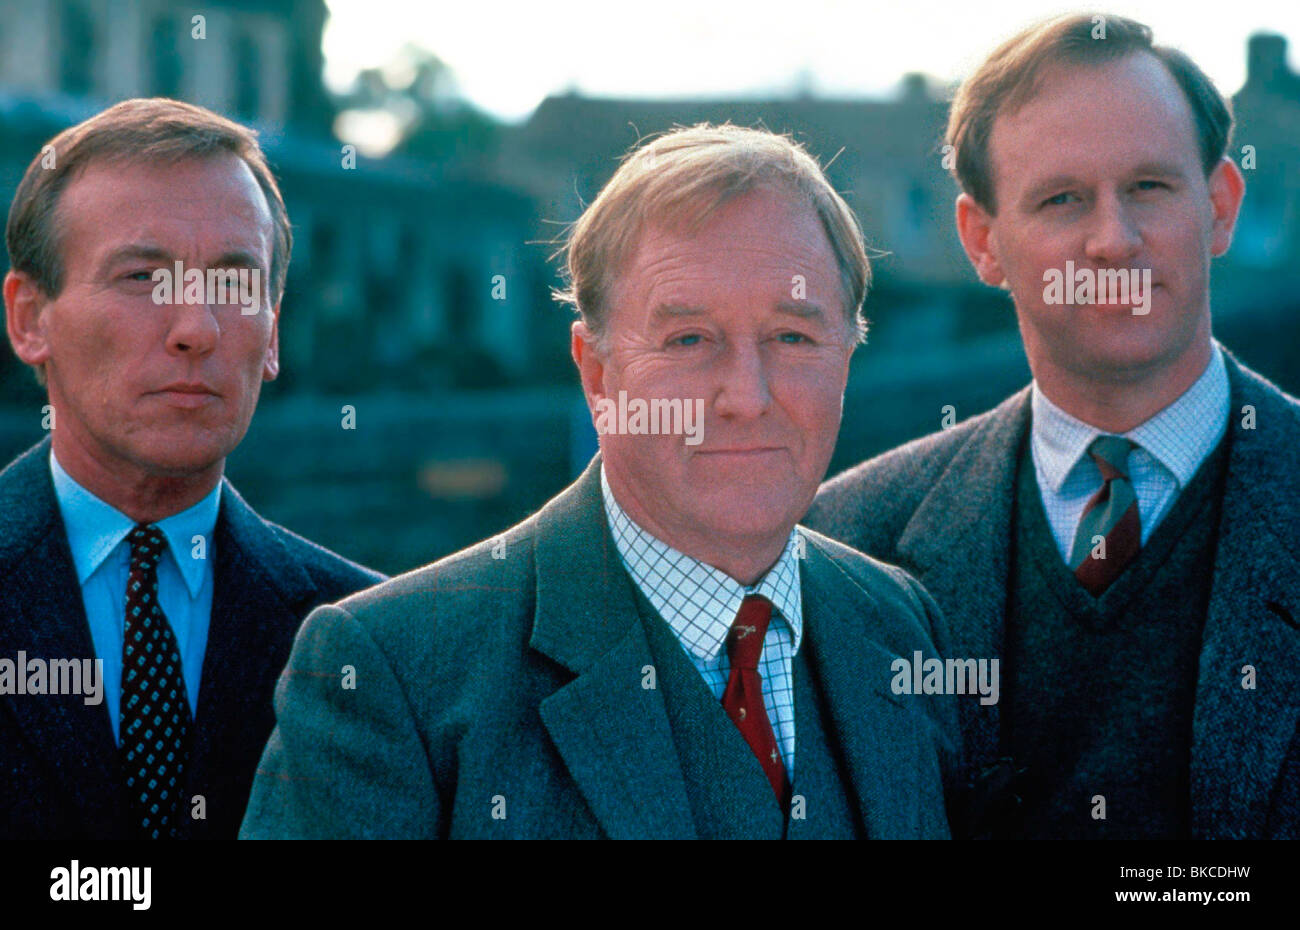 ALL CREATURES GREAT AND SMALL (TV) CHRISTOPHER TIMOTHY, ROBERT HARDY, PETER DAVISON CREDIT BBC ALCR 009 Stock Photo